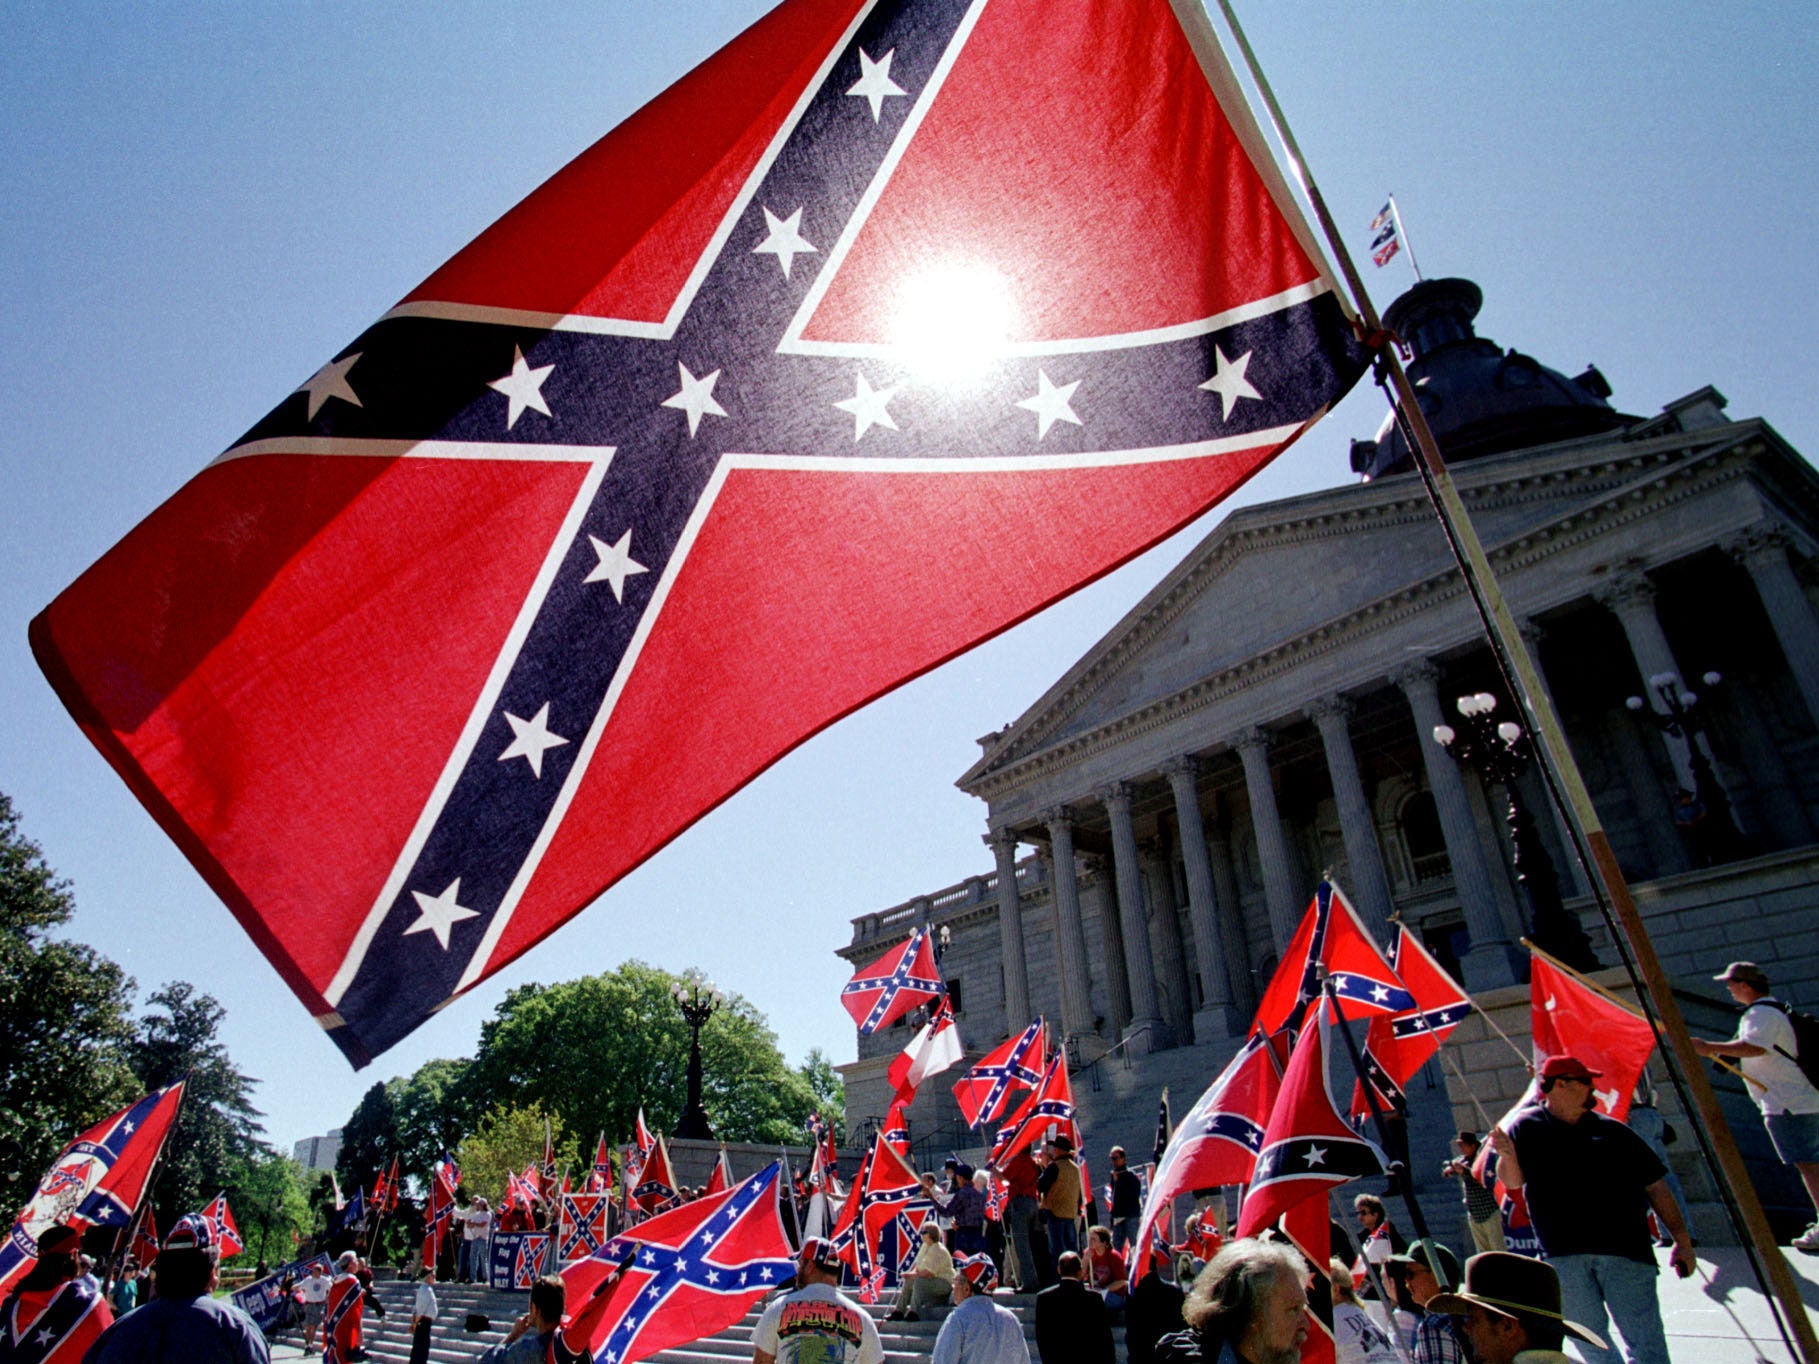 Confederate flag supporters protesting in 2000 as South Carolina considered removing it from the capitol building